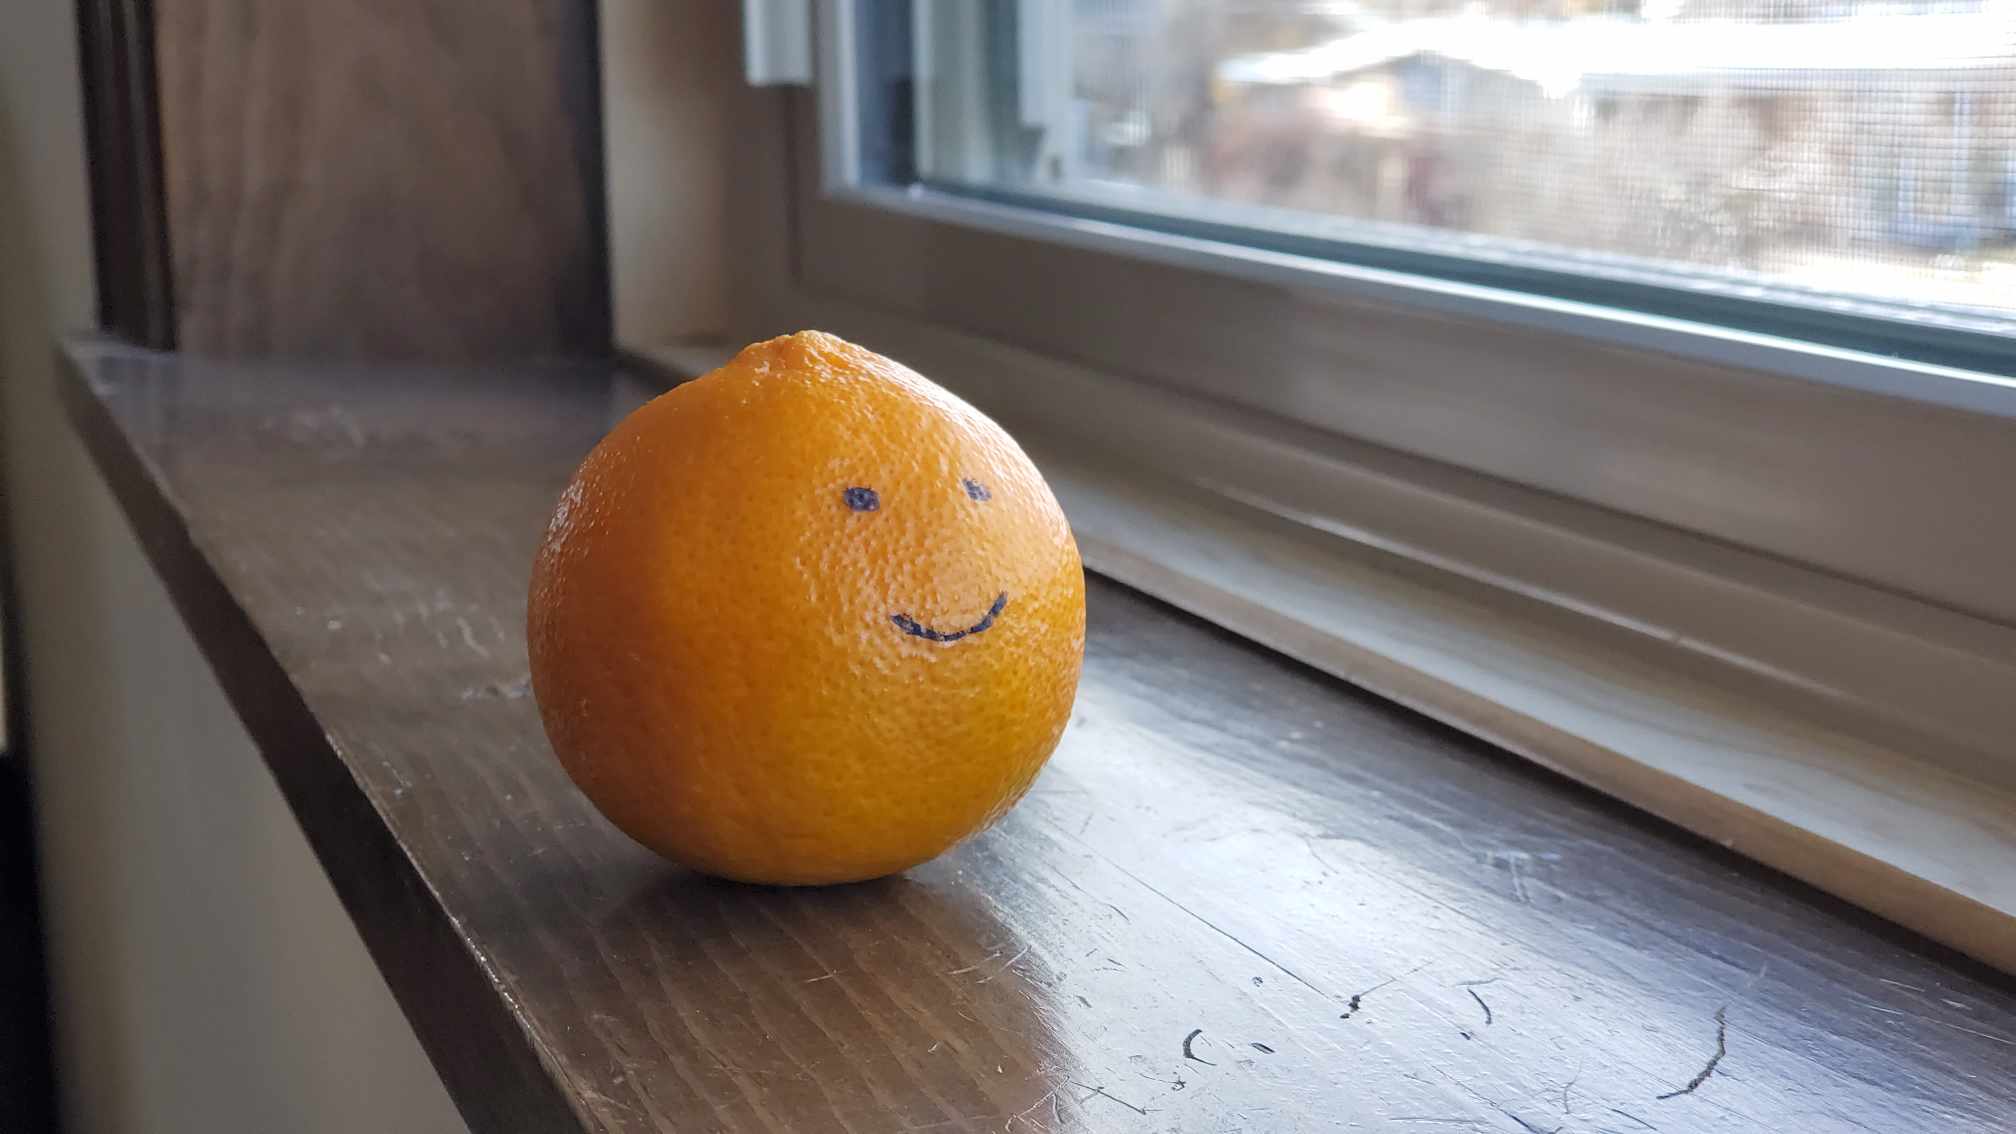 A mandarin orange with a face drawn on it photographed on a window sill.